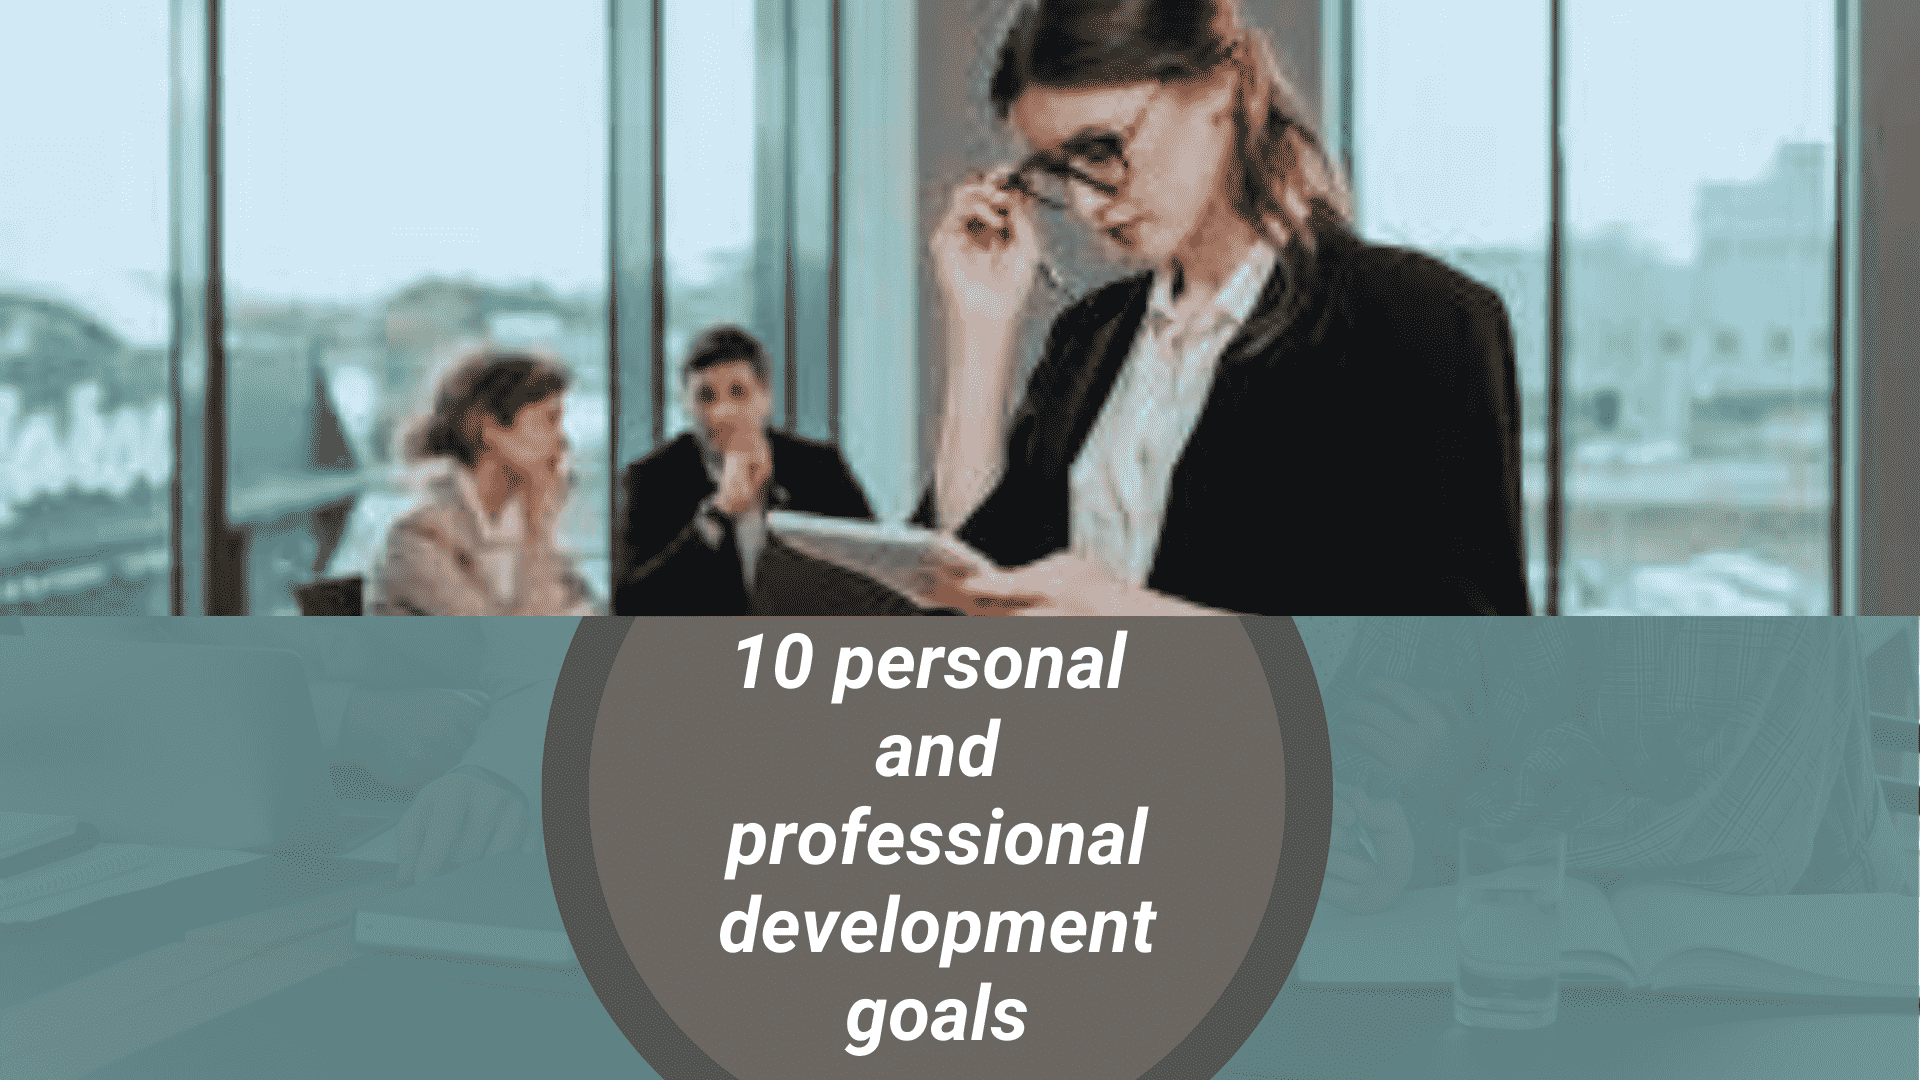 10 personal and professional development goals